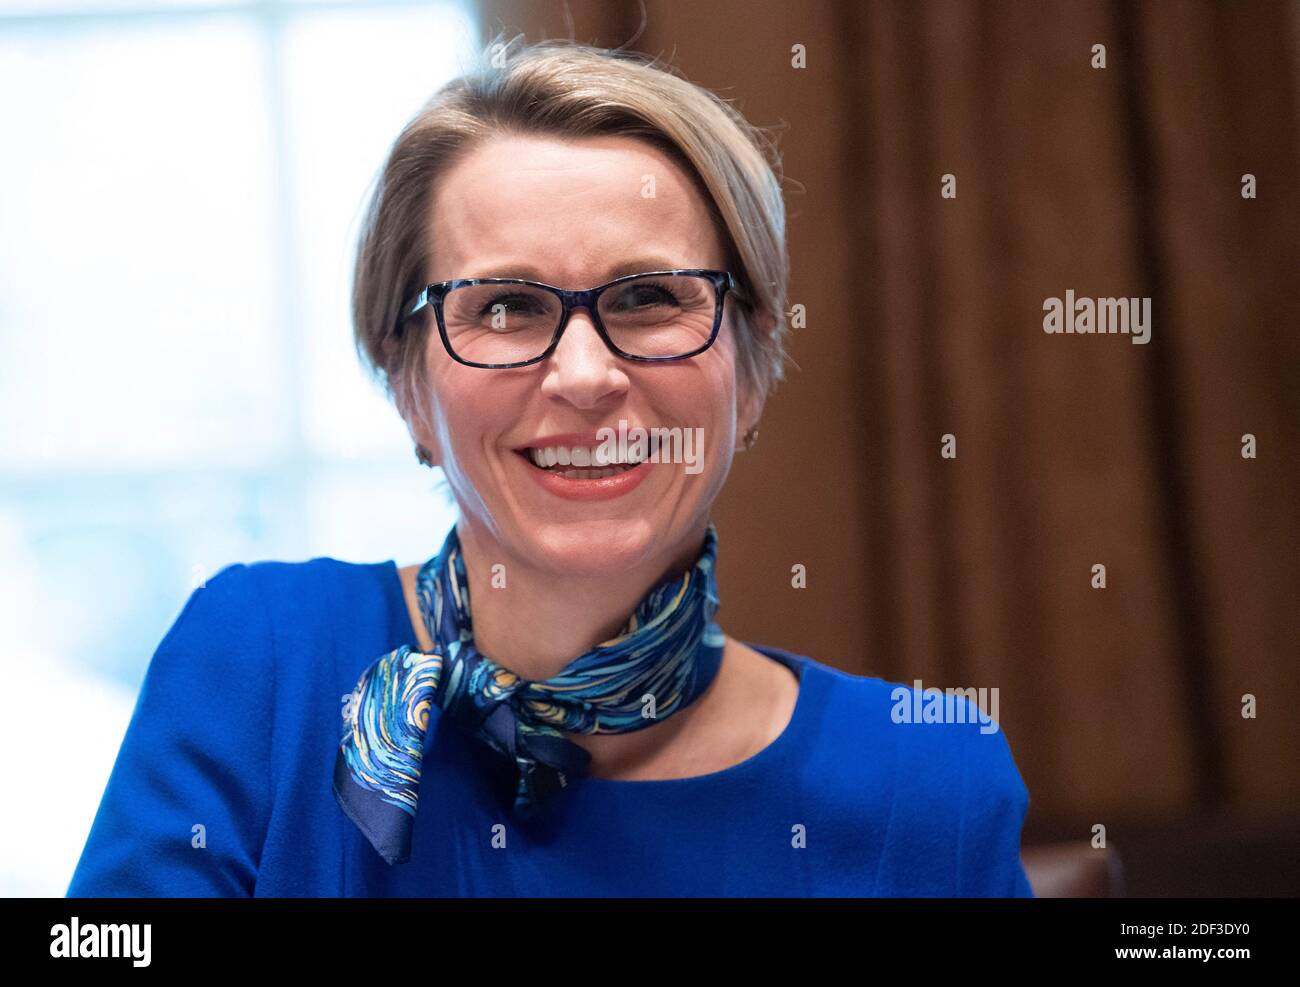 Emma Walmsley, CEO of GlaxoSmithKline, attends a meeting held by President Donald Trump with the Coronavirus Task Force and fellow pharmaceutical executives, at the White House in Washington, D.C. on March 2, 2020. Photo by Kevin Dietsch/Pool/ABACAPRESS.COM Stock Photo